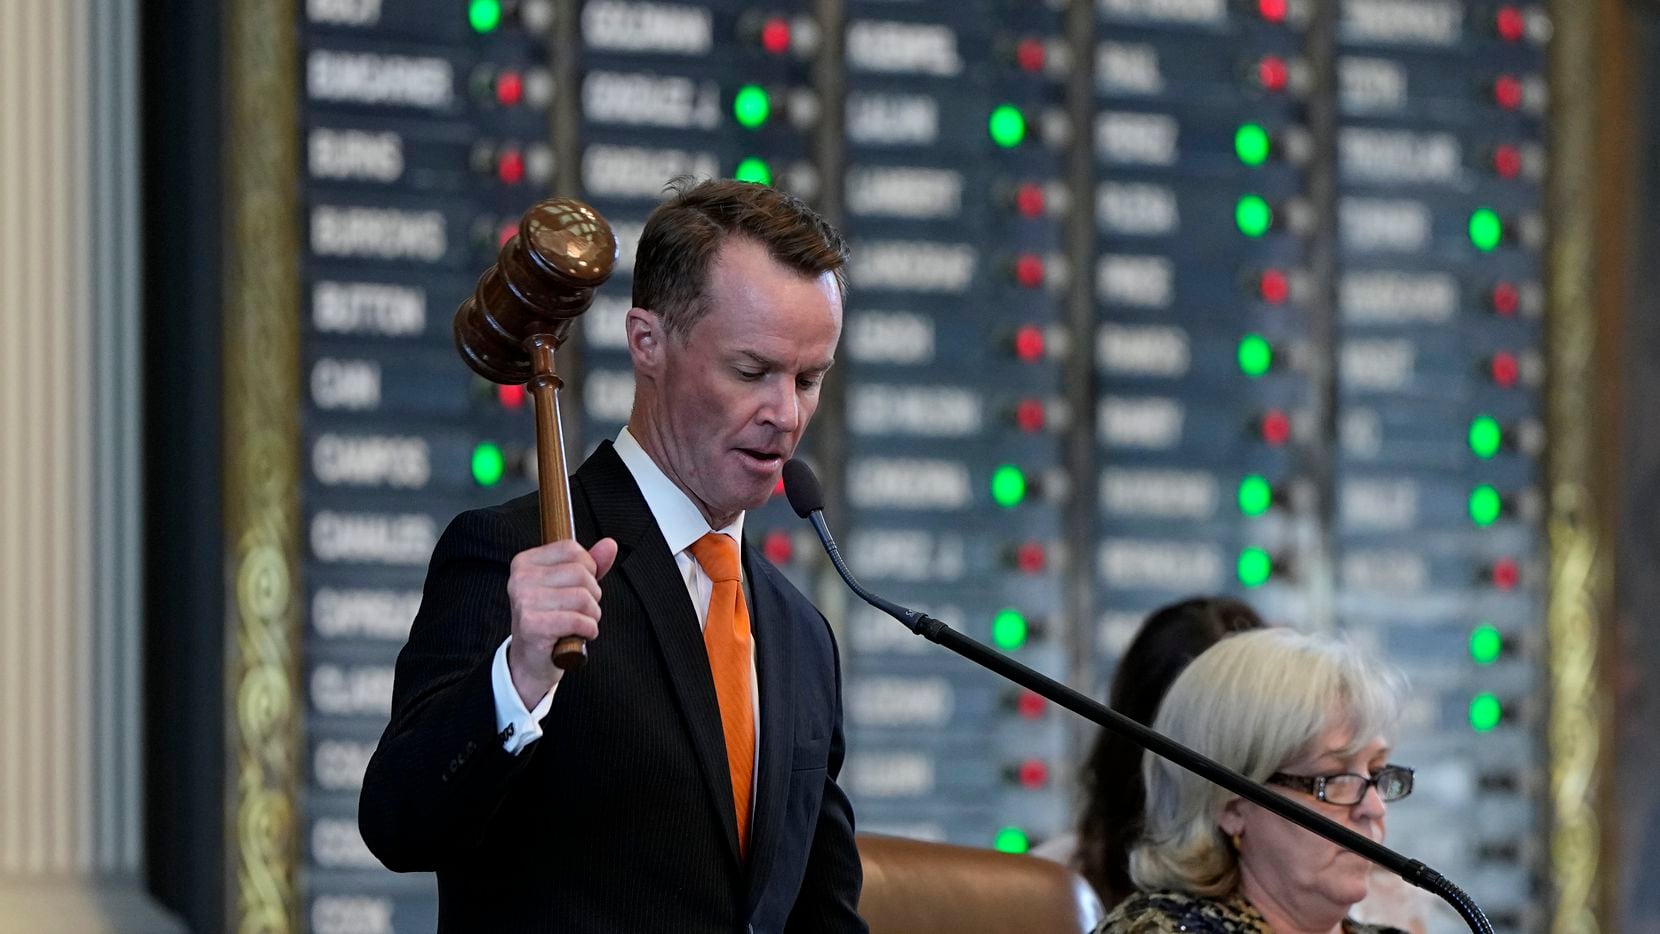 Texas Speaker of the House Dade Phelan declined to discuss Attorney General Ken Paxton's...